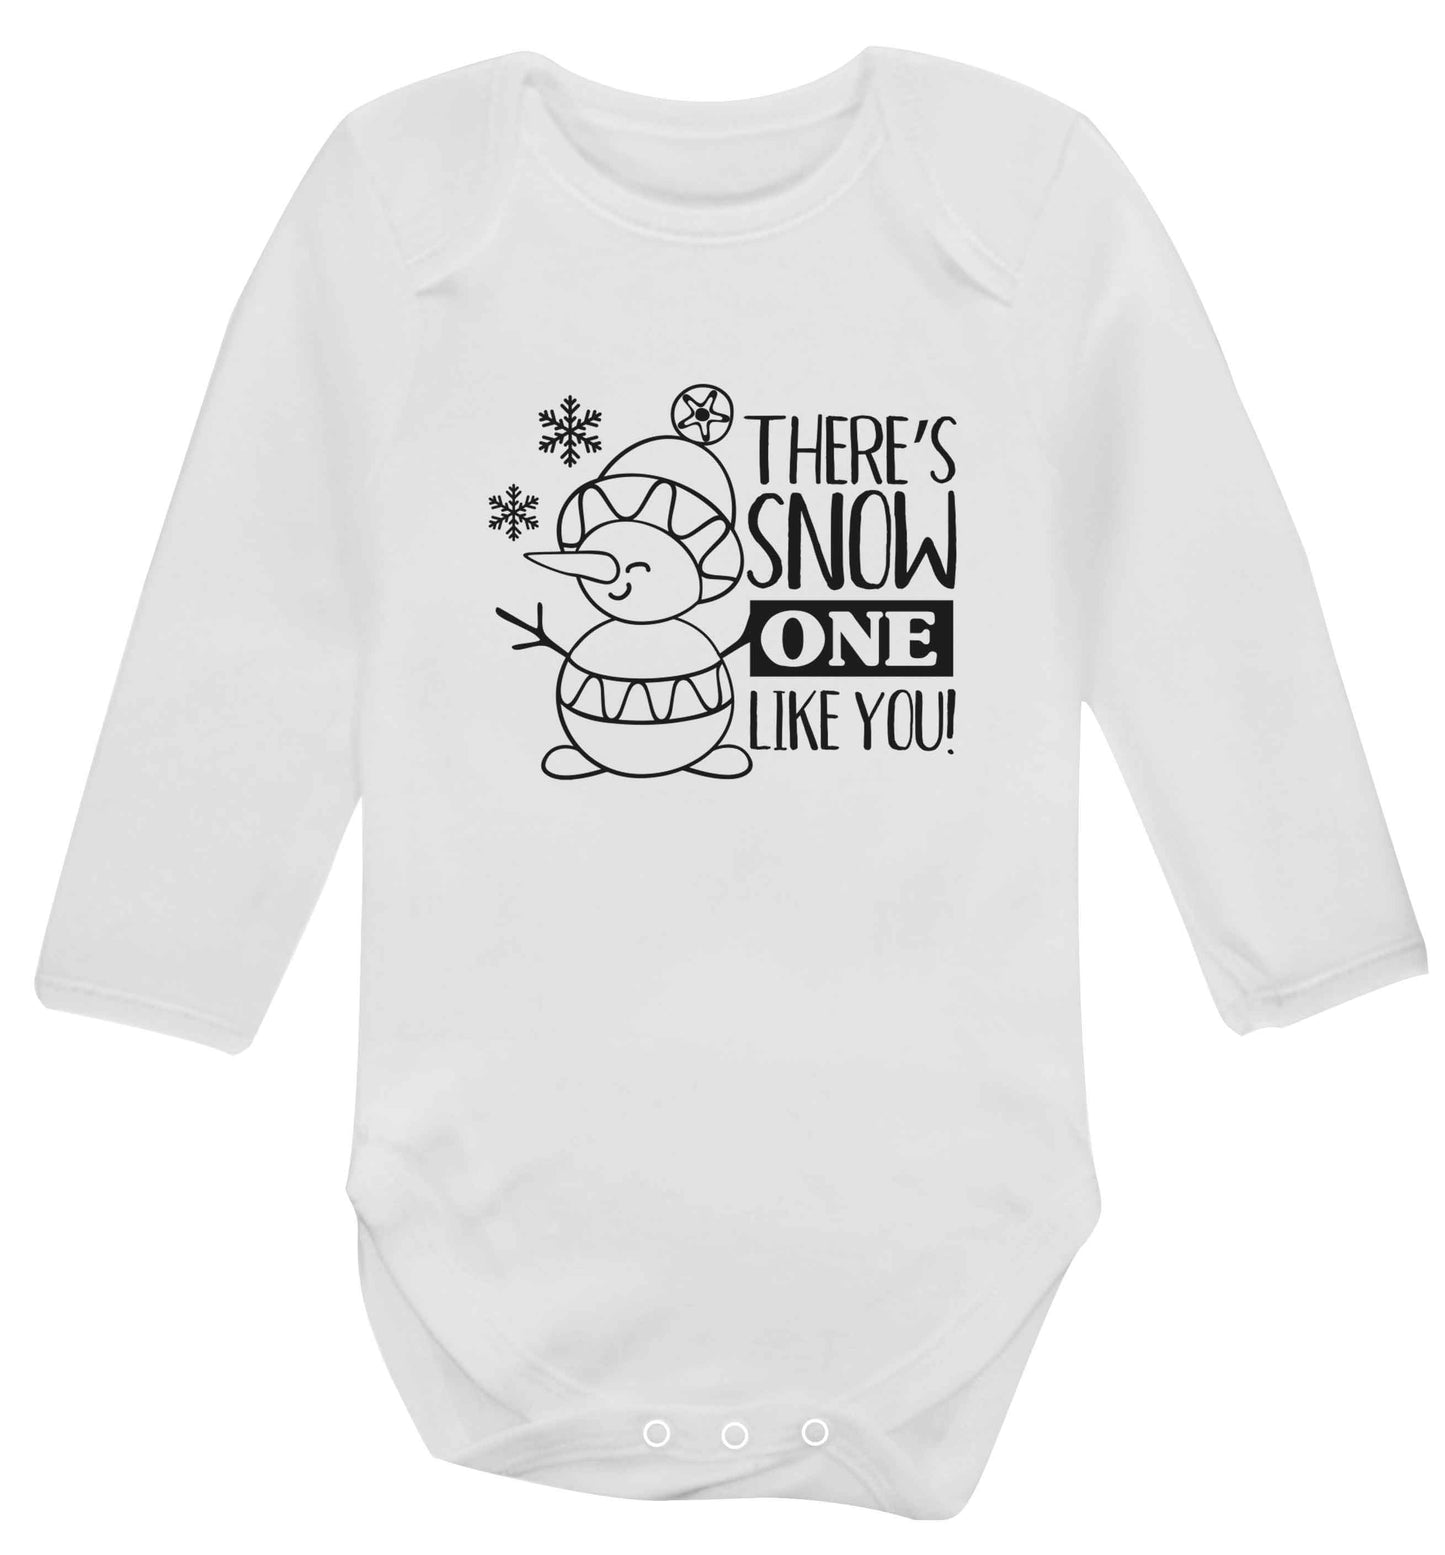 There's snow one like you baby vest long sleeved white 6-12 months